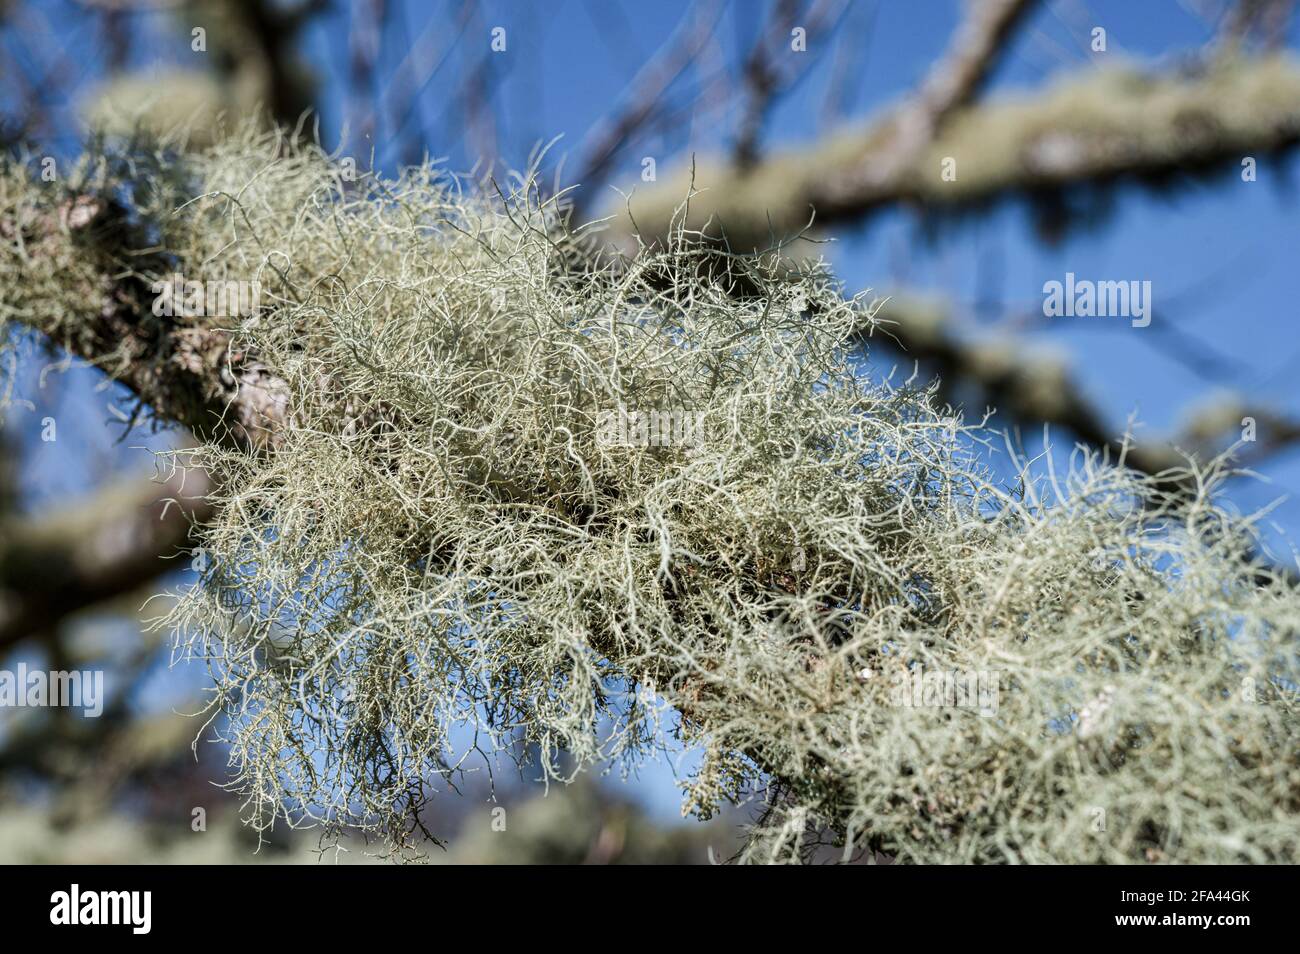 What looks to be Usnea or Beard Lichen growing on the branch of a tree in Ireland Stock Photo